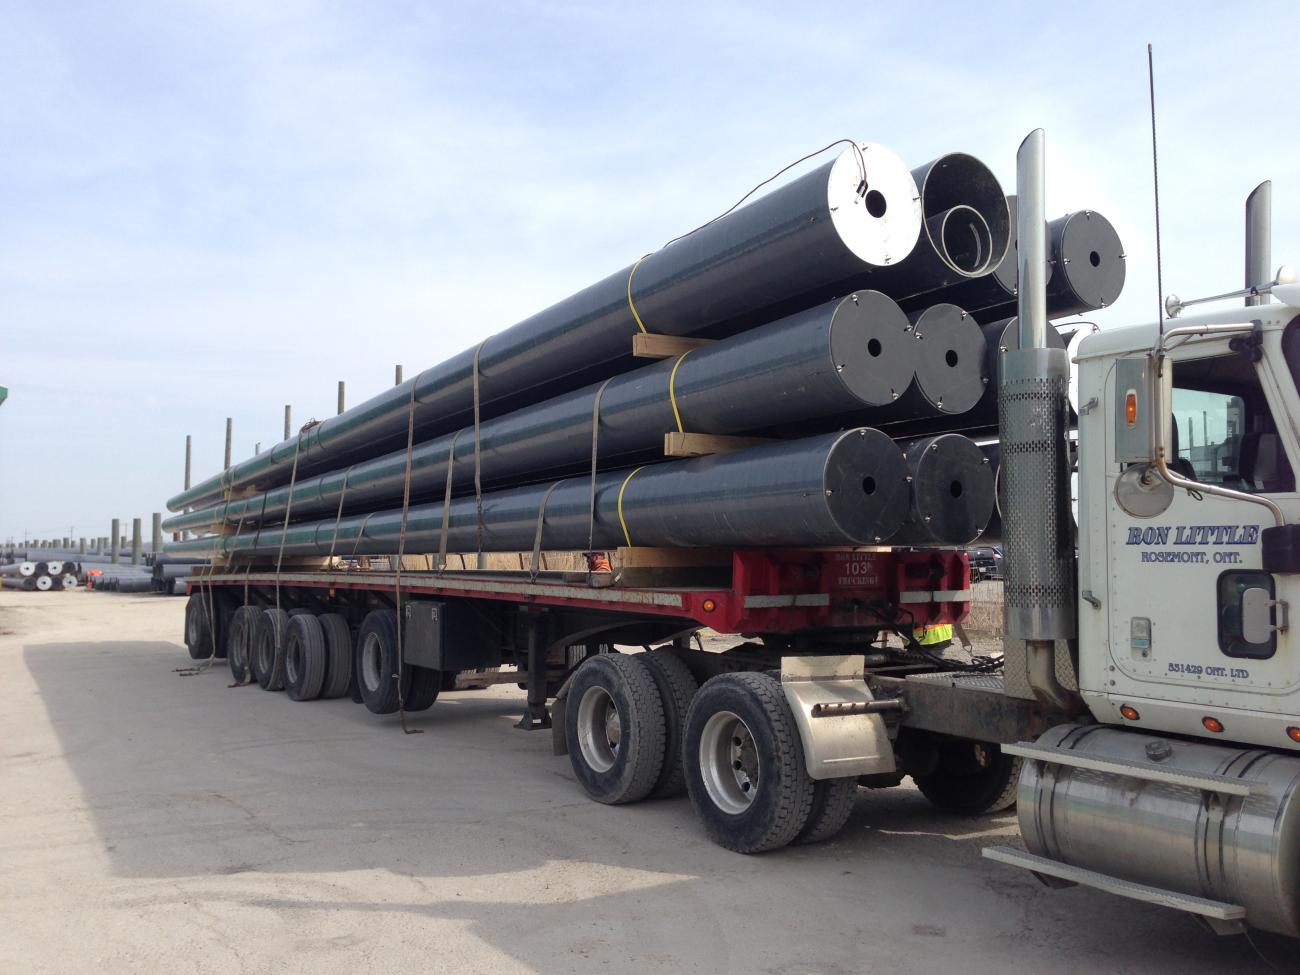 RS PowerON nested modular poles loaded and in transport